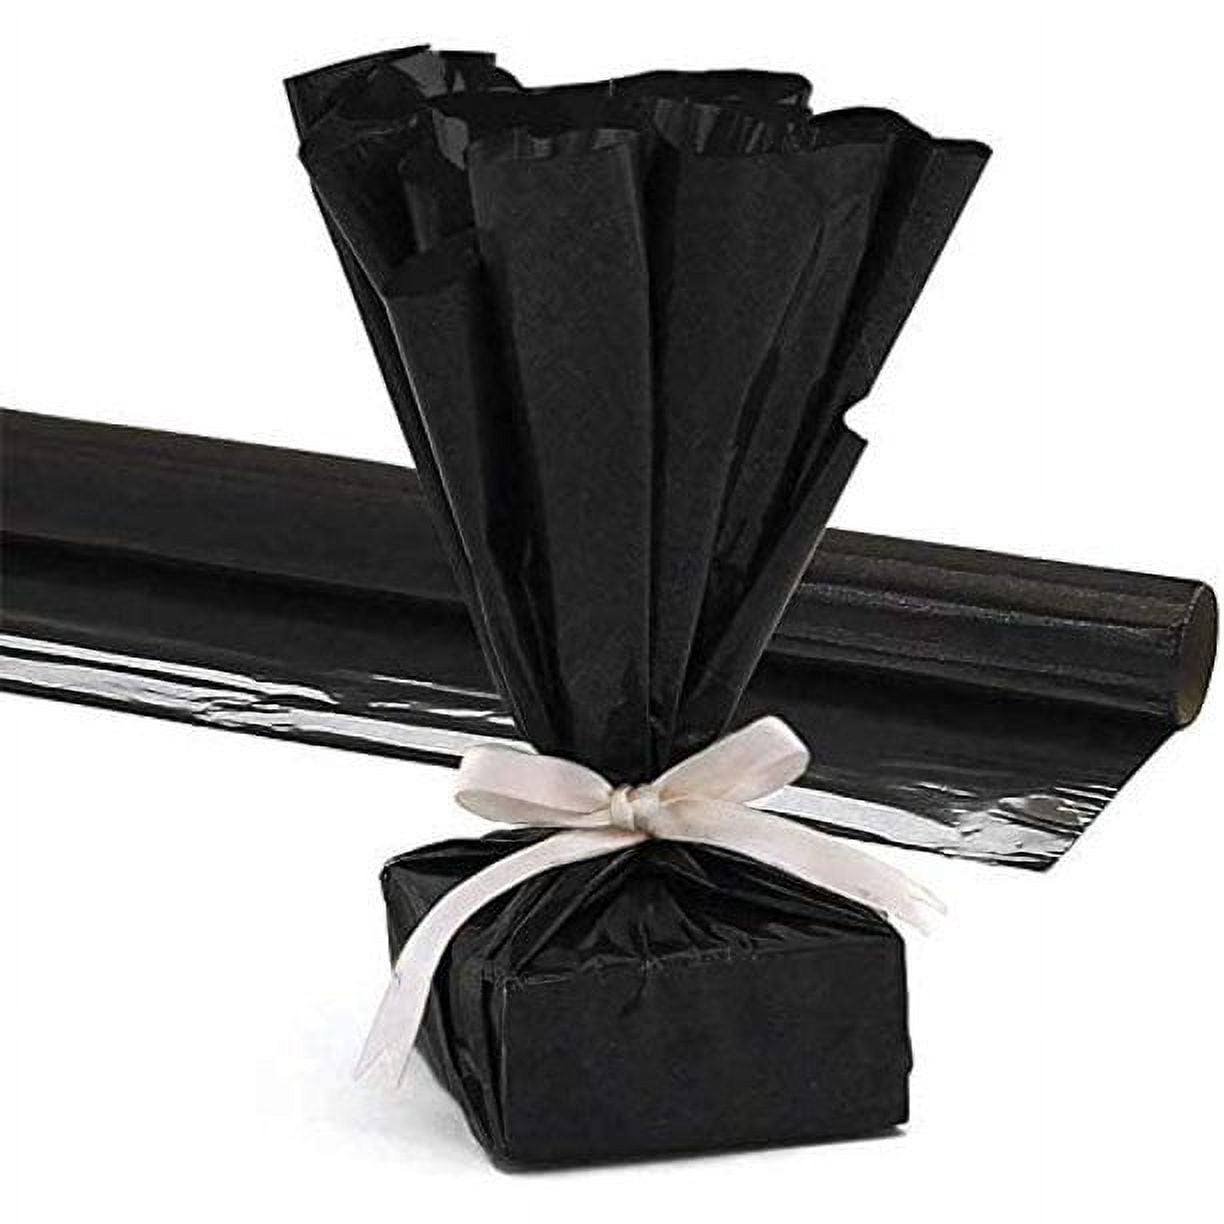  Gift Wrap - Solids - Black Matte (Recycled — Mac Paper Supply